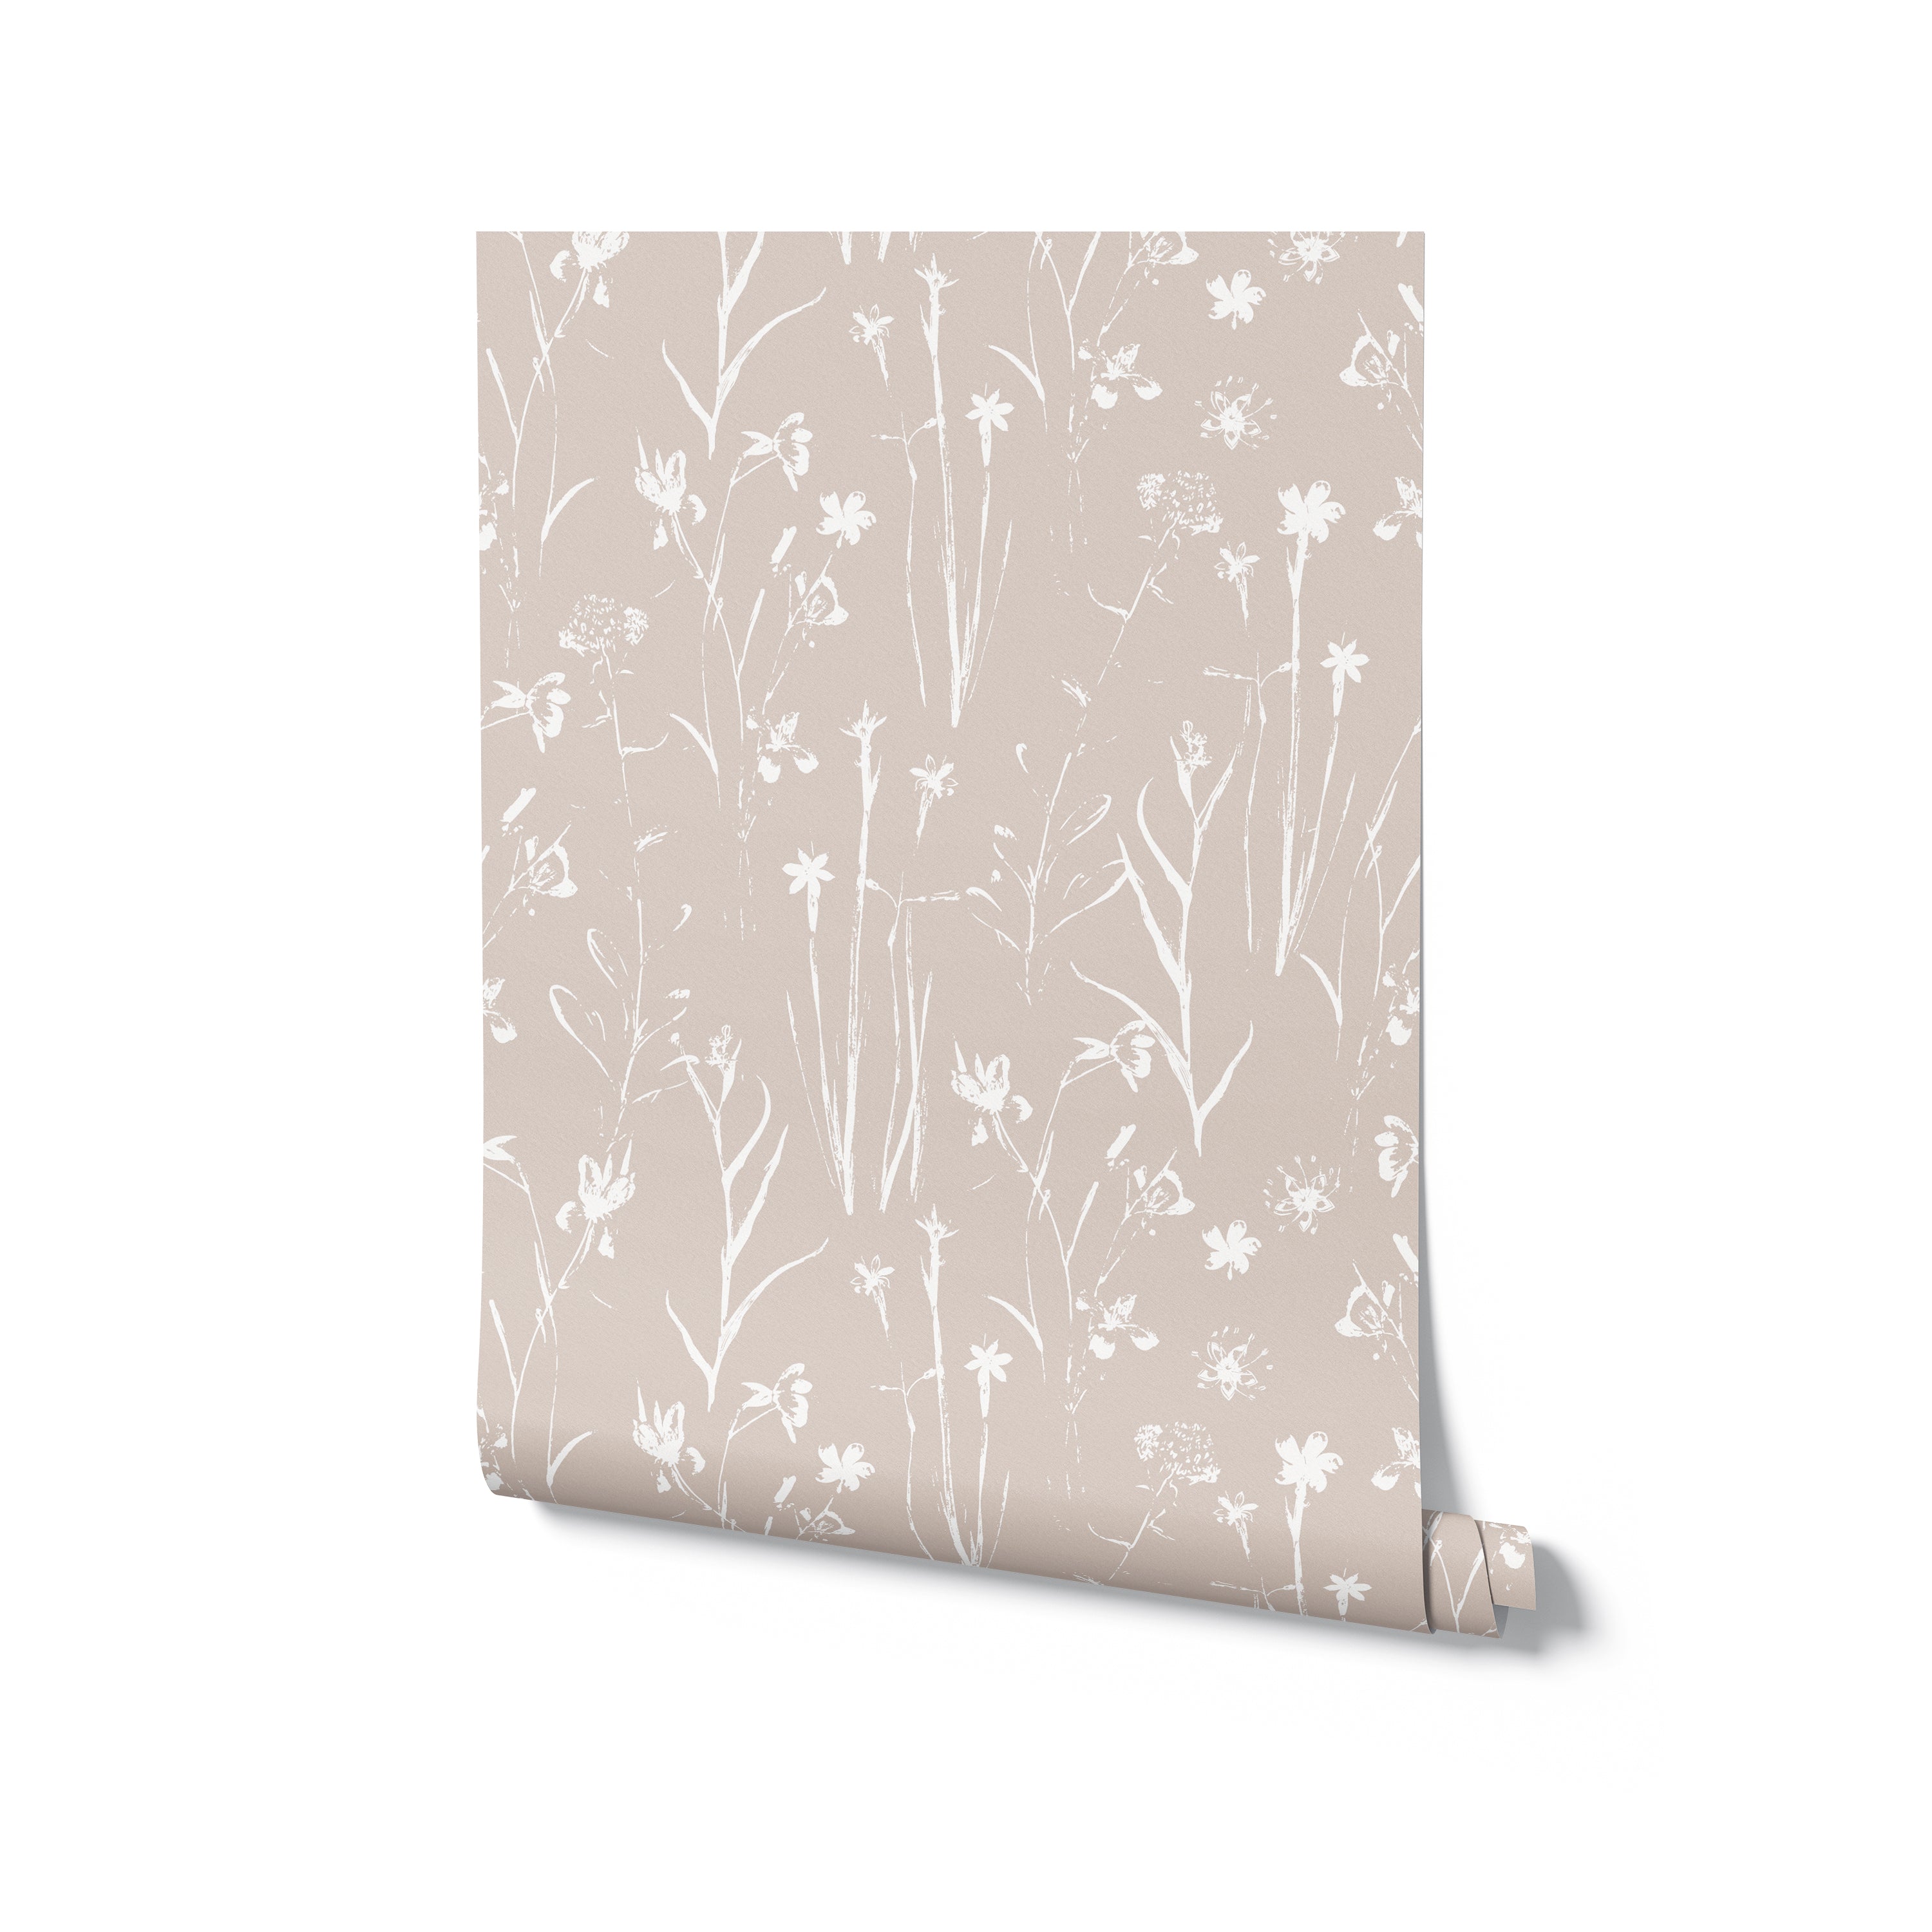 Rolled sample of Subtle Meadow Floral Wallpaper with a pattern of white wildflowers and stems on a taupe background, ideal for adding a touch of nature to any room.